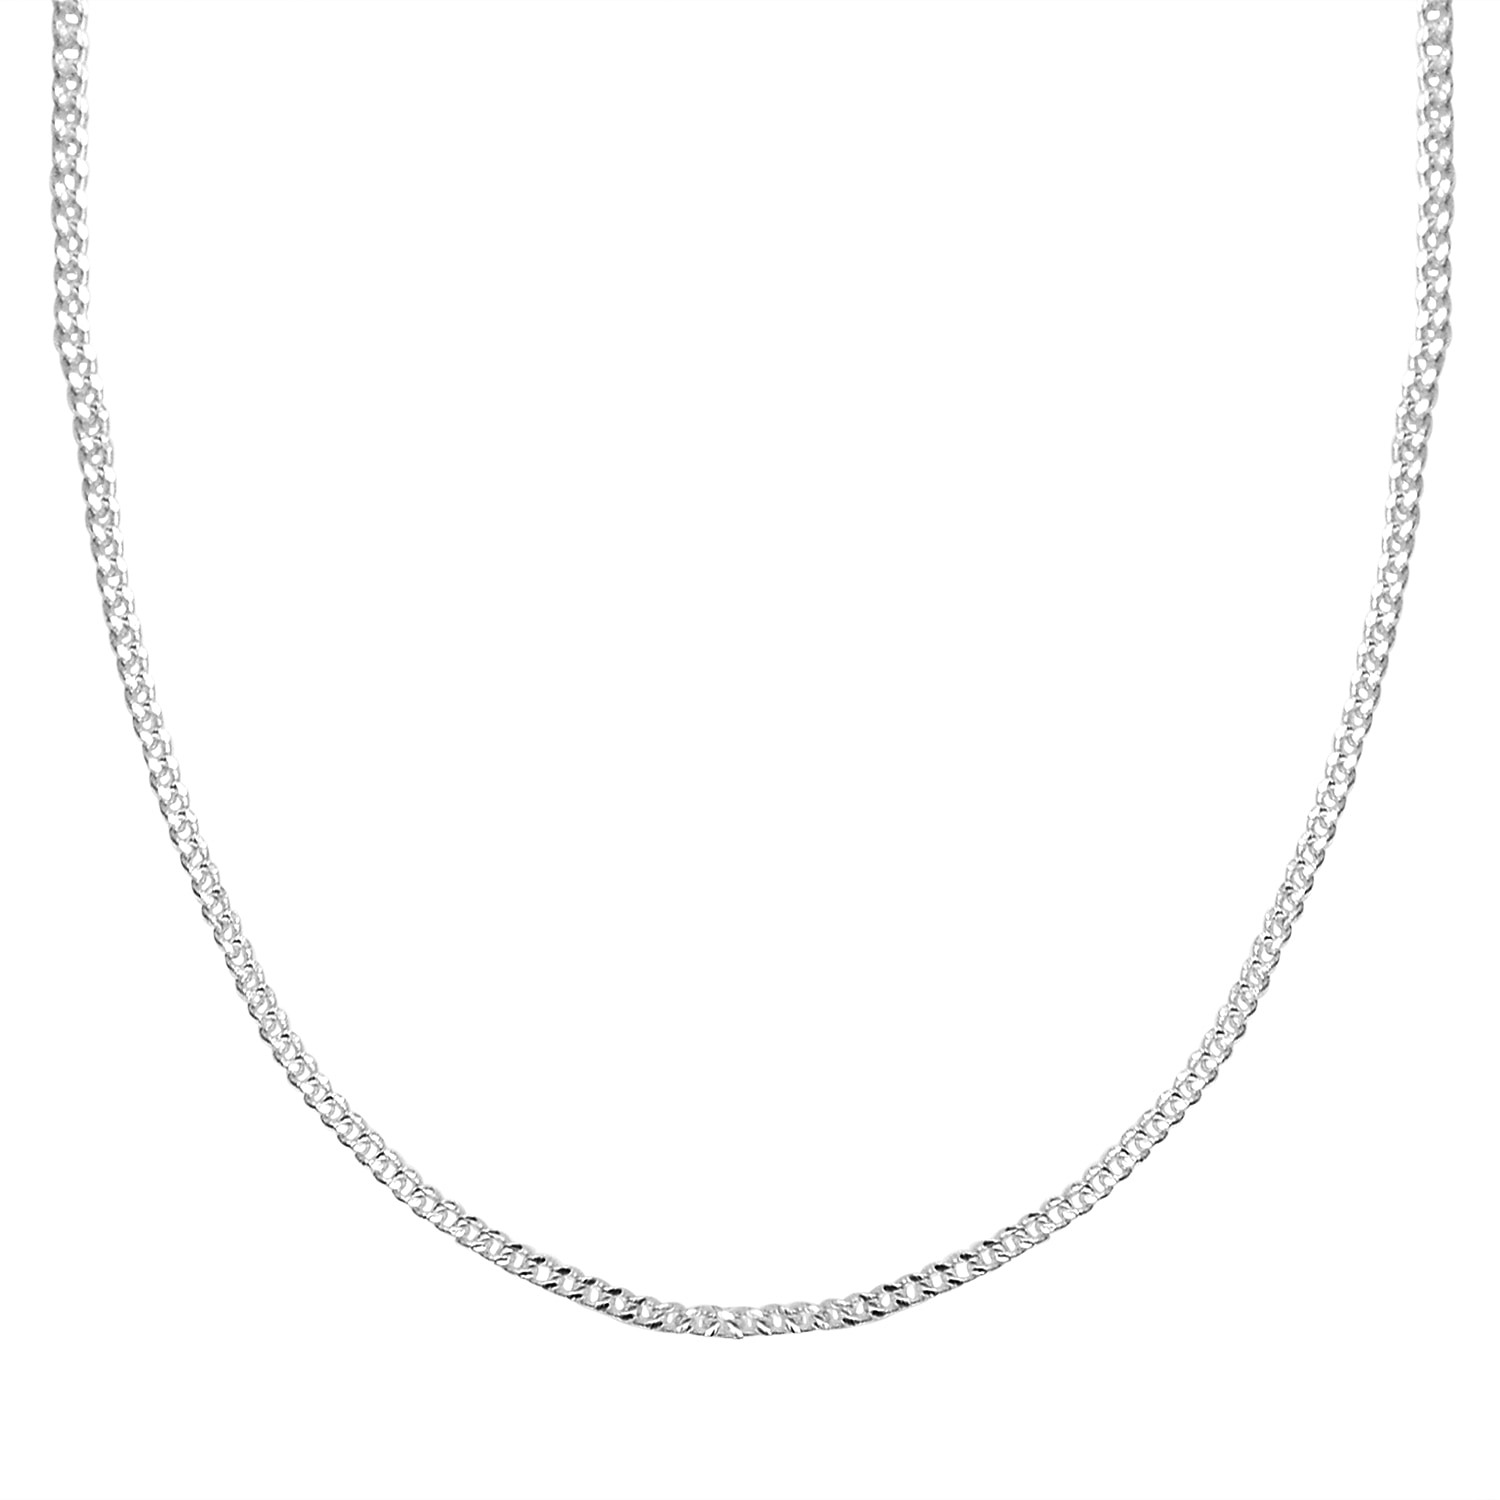 One Time Closeout- Sterling Silver Curb Chain (Size - 18)